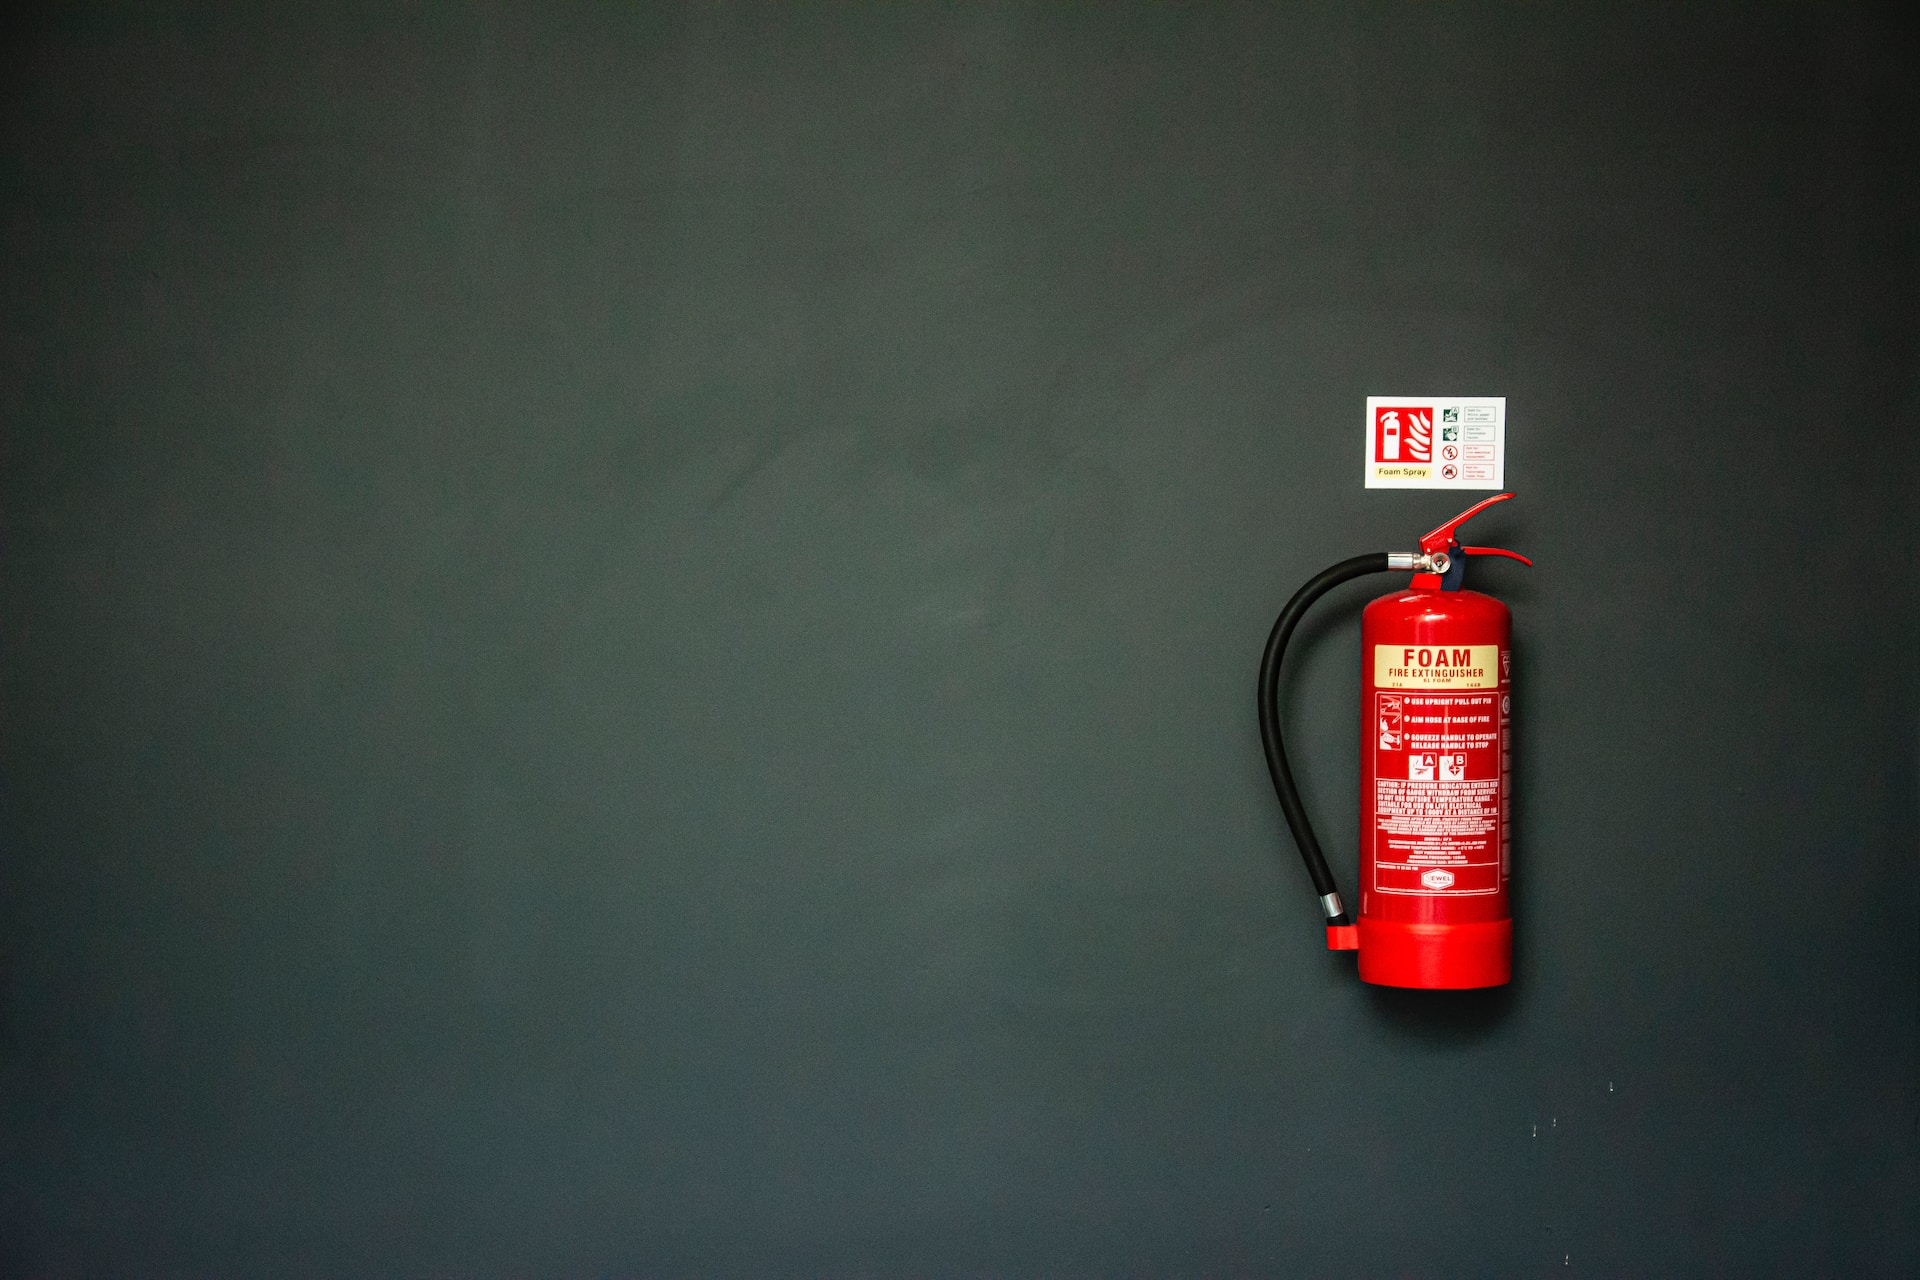 A red fire extinguisher against a dark wall